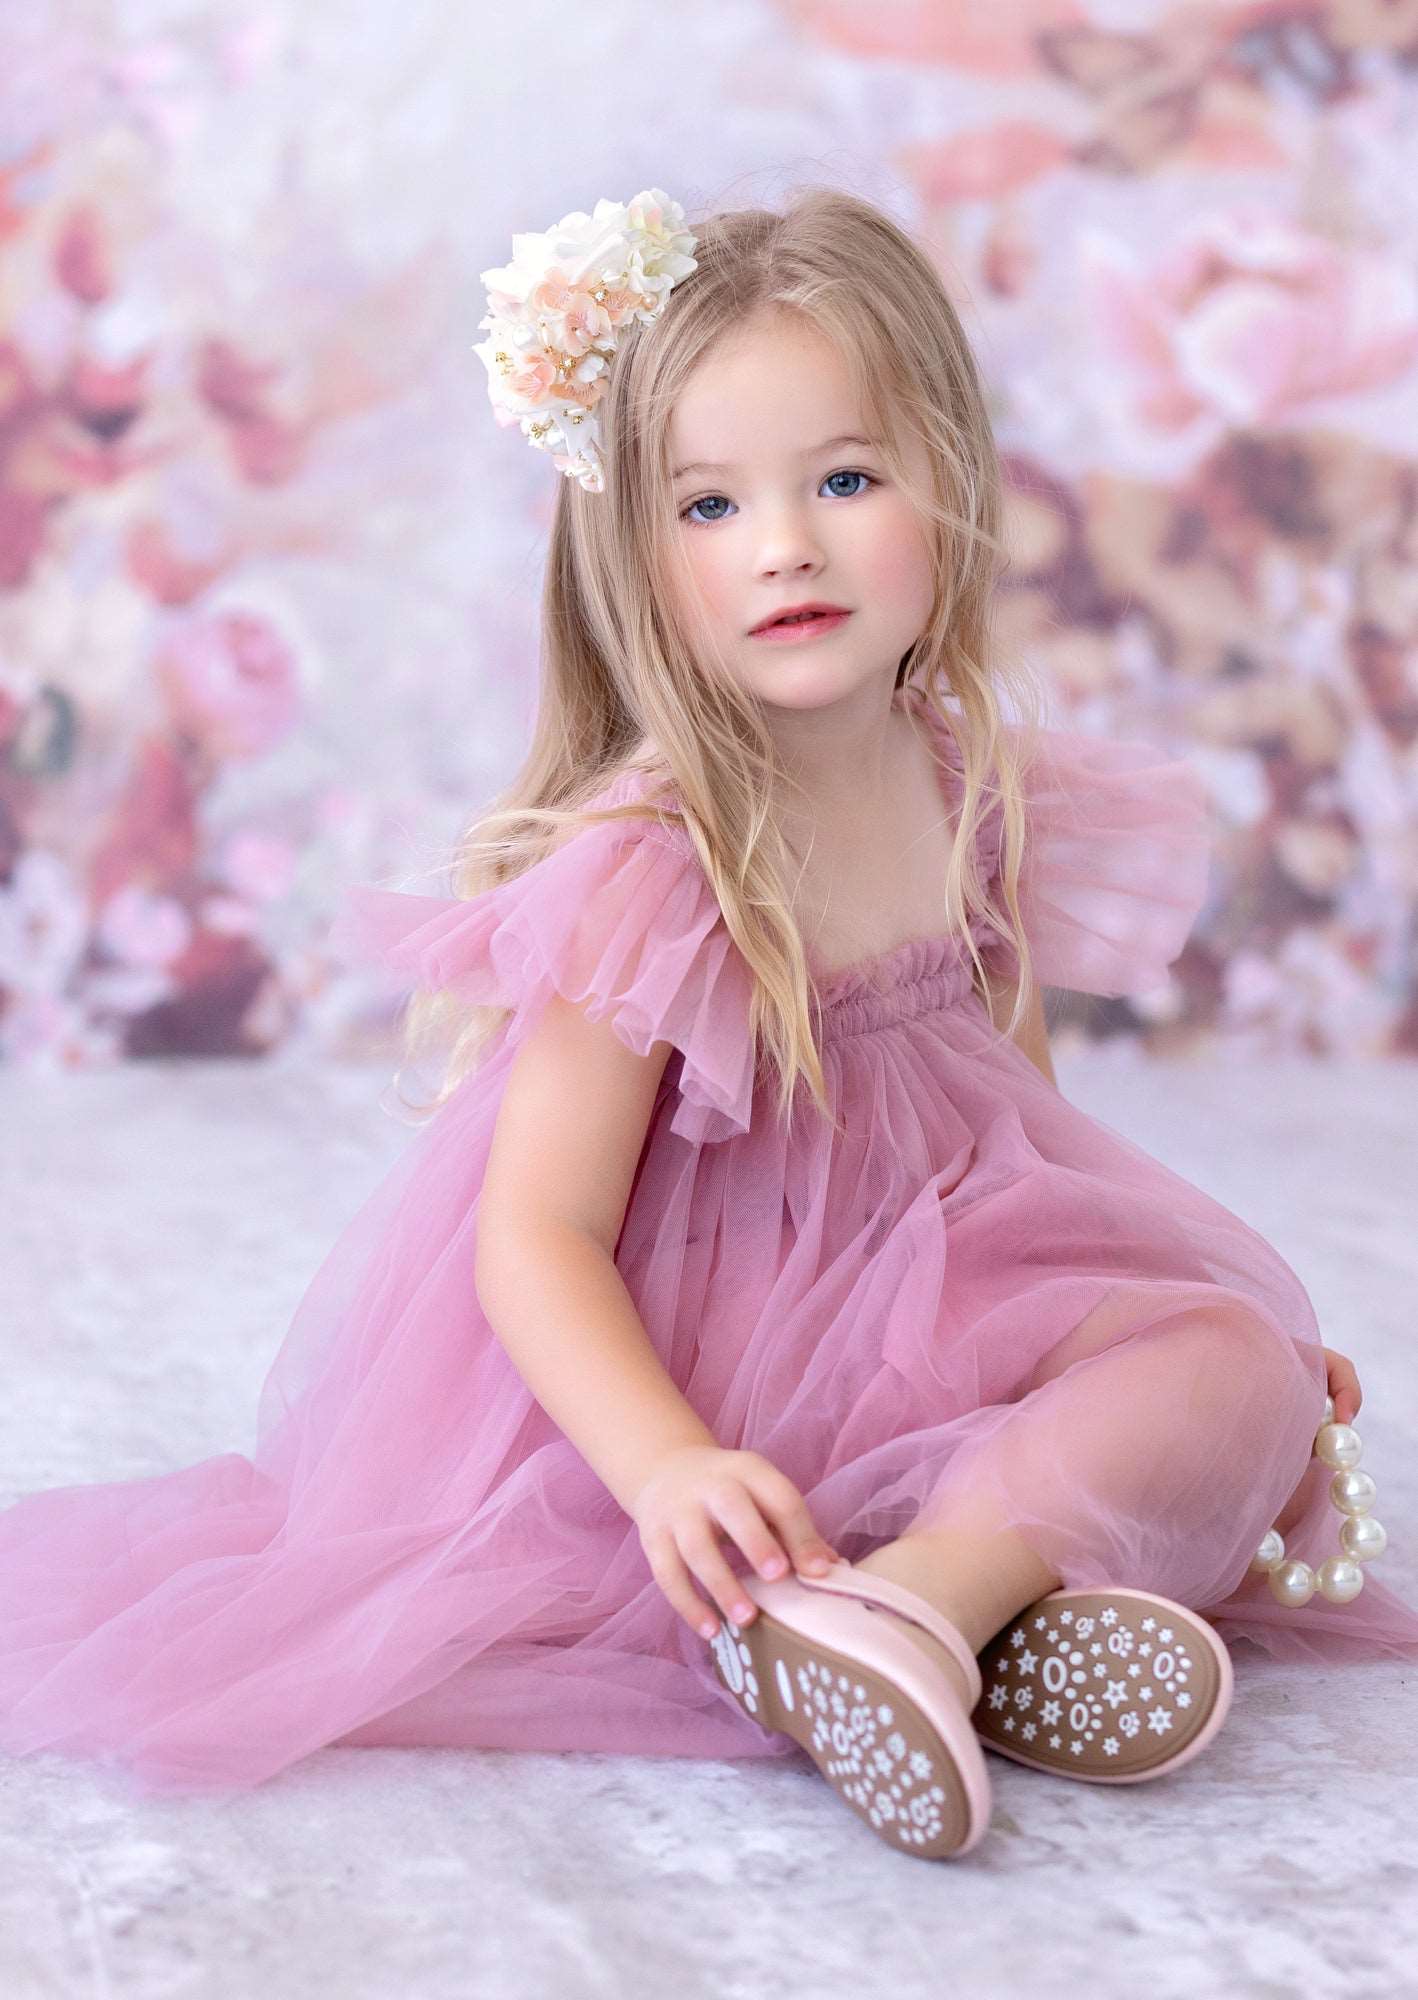 cute baby with pink dress